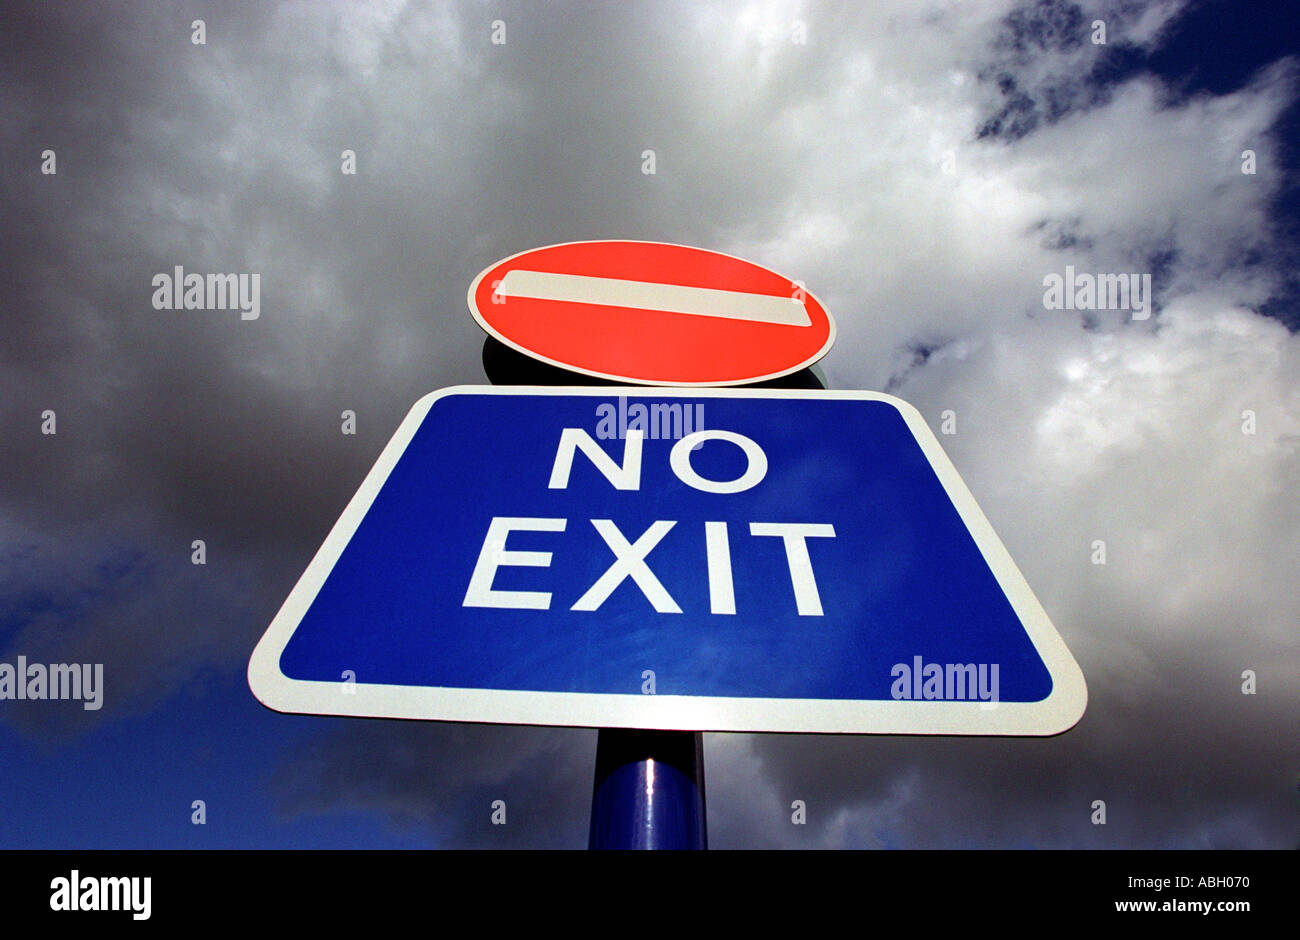 No Exit sign Stock Photo